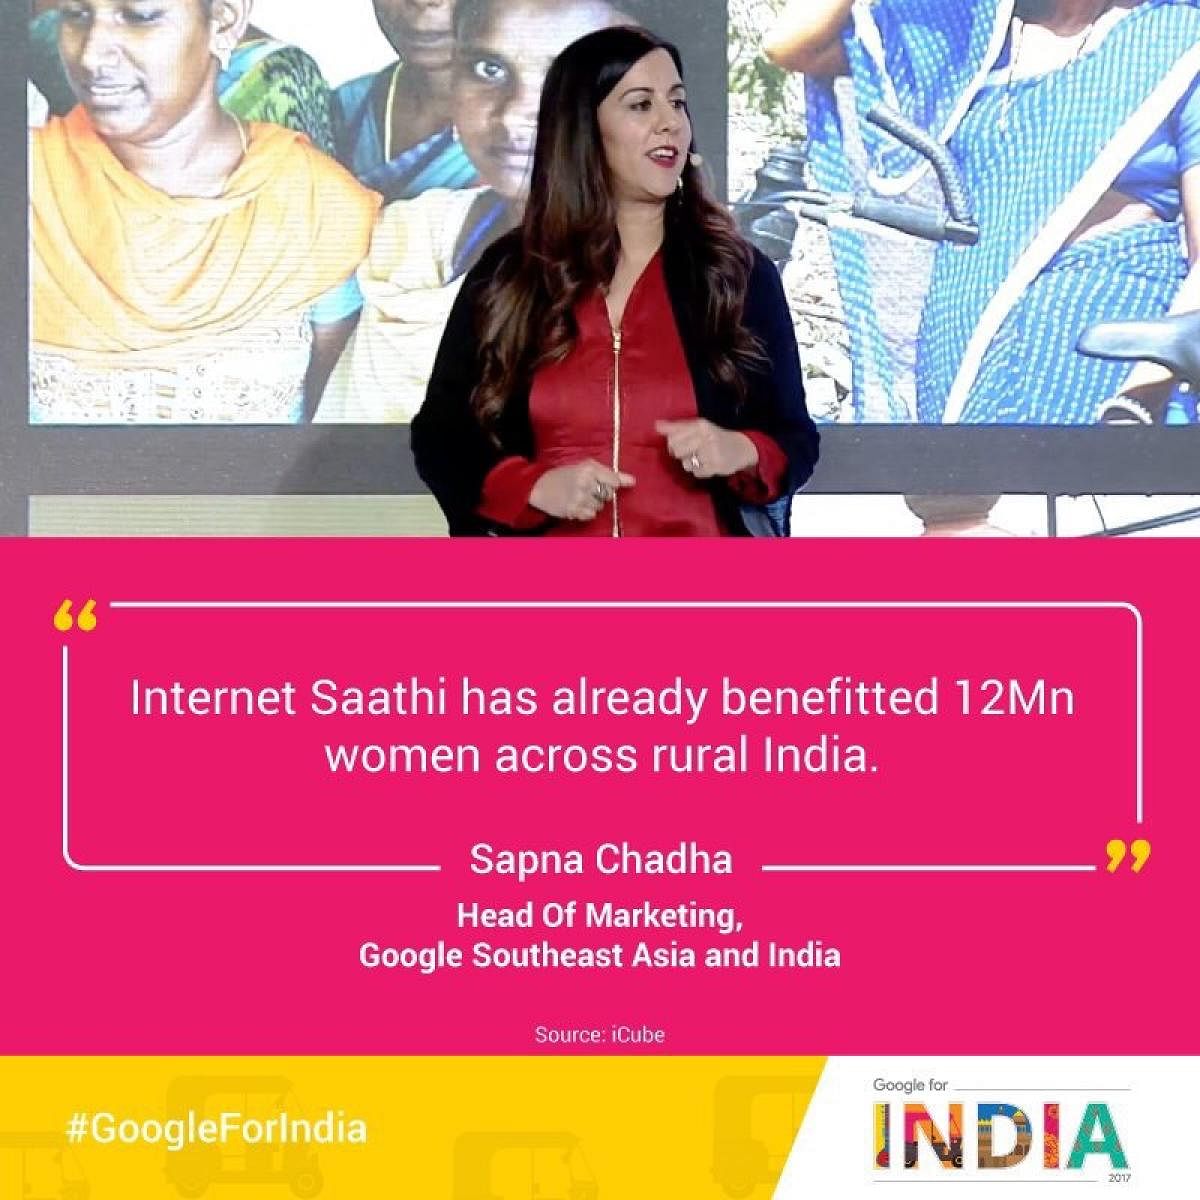 Google South East Asia and India Head of Marketing Sapna Chadha speaks at a programme to promote Internet Saathi programme to support the Foundation For Rural Entrepreneurship Development (FREND) set up by Tata Trusts.